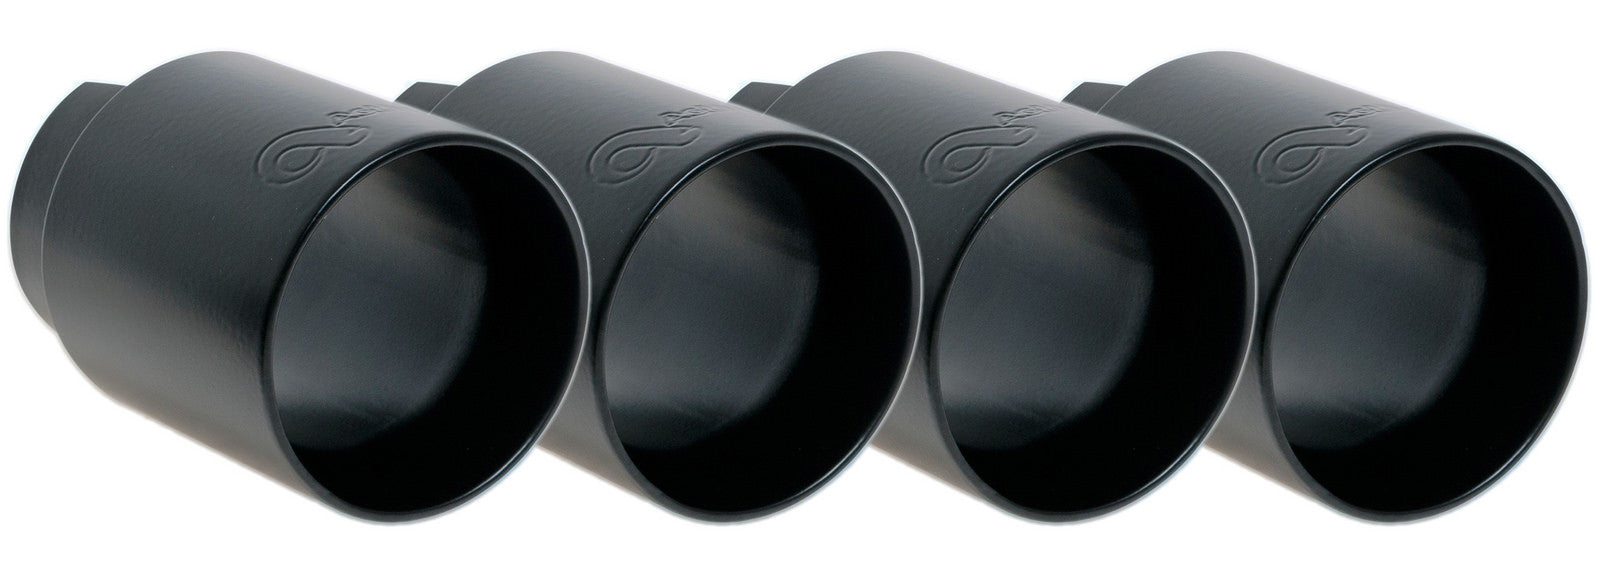 F8X BMW M3 & M4 Rear Exhaust Tips - for Active exhausts | Active ...